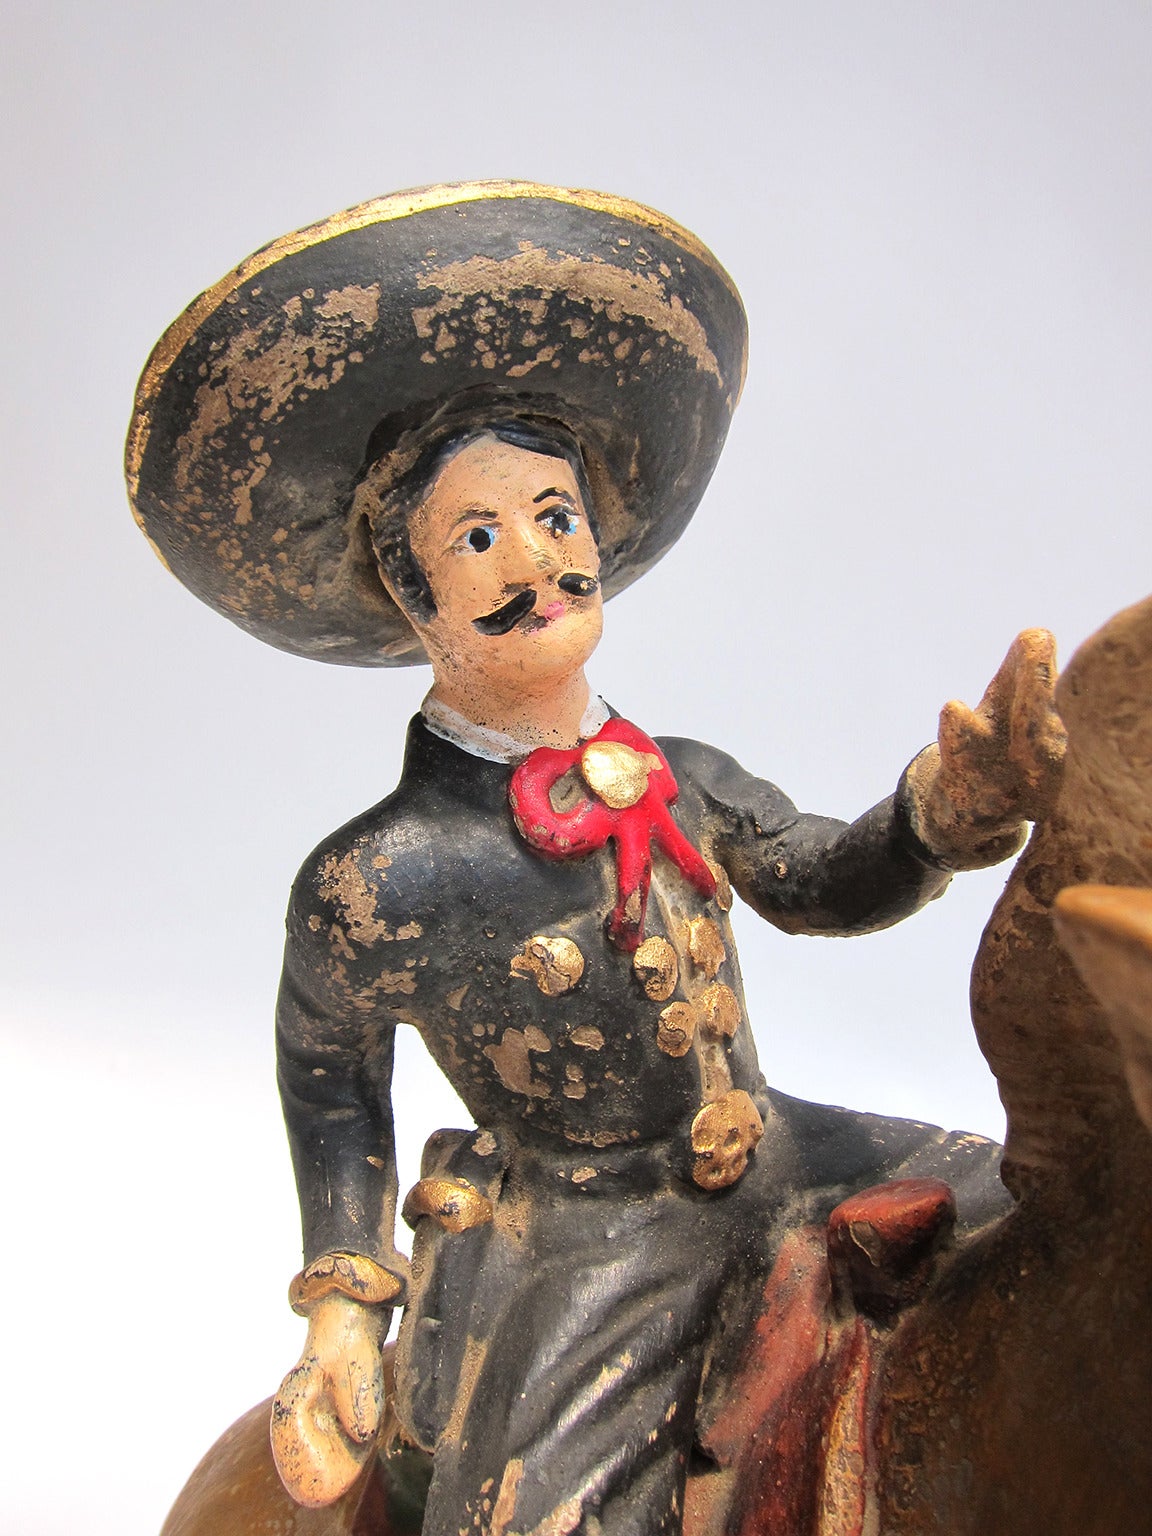 Paint Mounted Charro Figure from Tlaquepaque